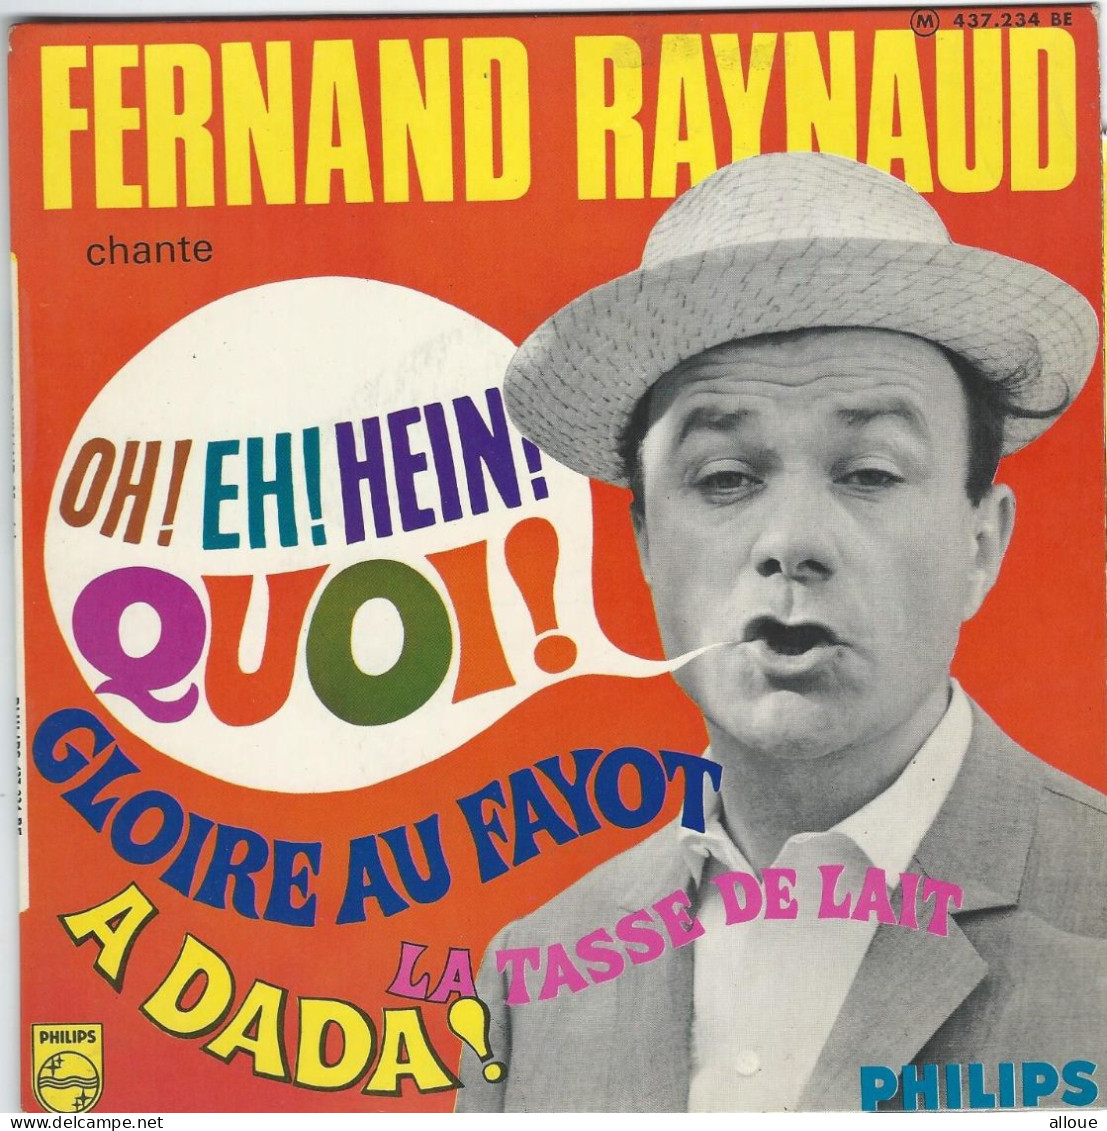 FERNAND RAYNAUD - FR EP - OH! EH! HEIN! QUOI! + 3 - Comiche